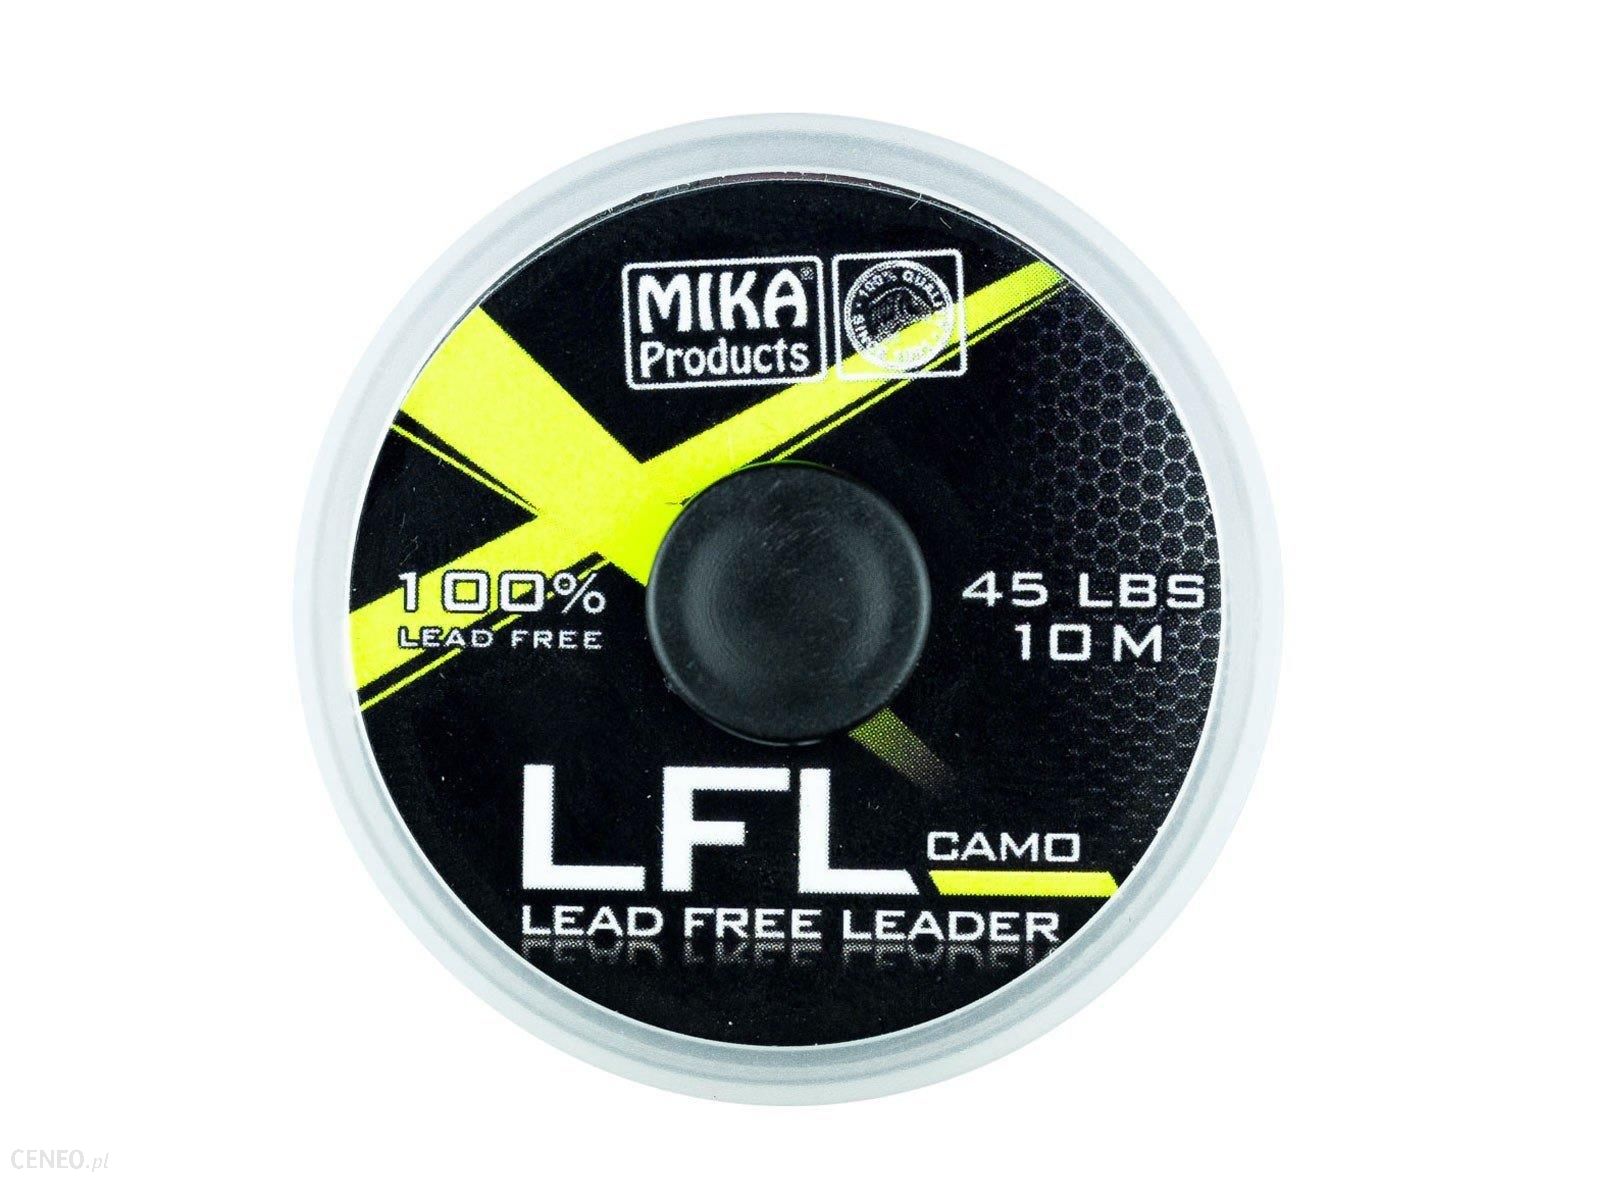 Mika Products Leadcore Free Leader Camo 45 Lbs 10 M